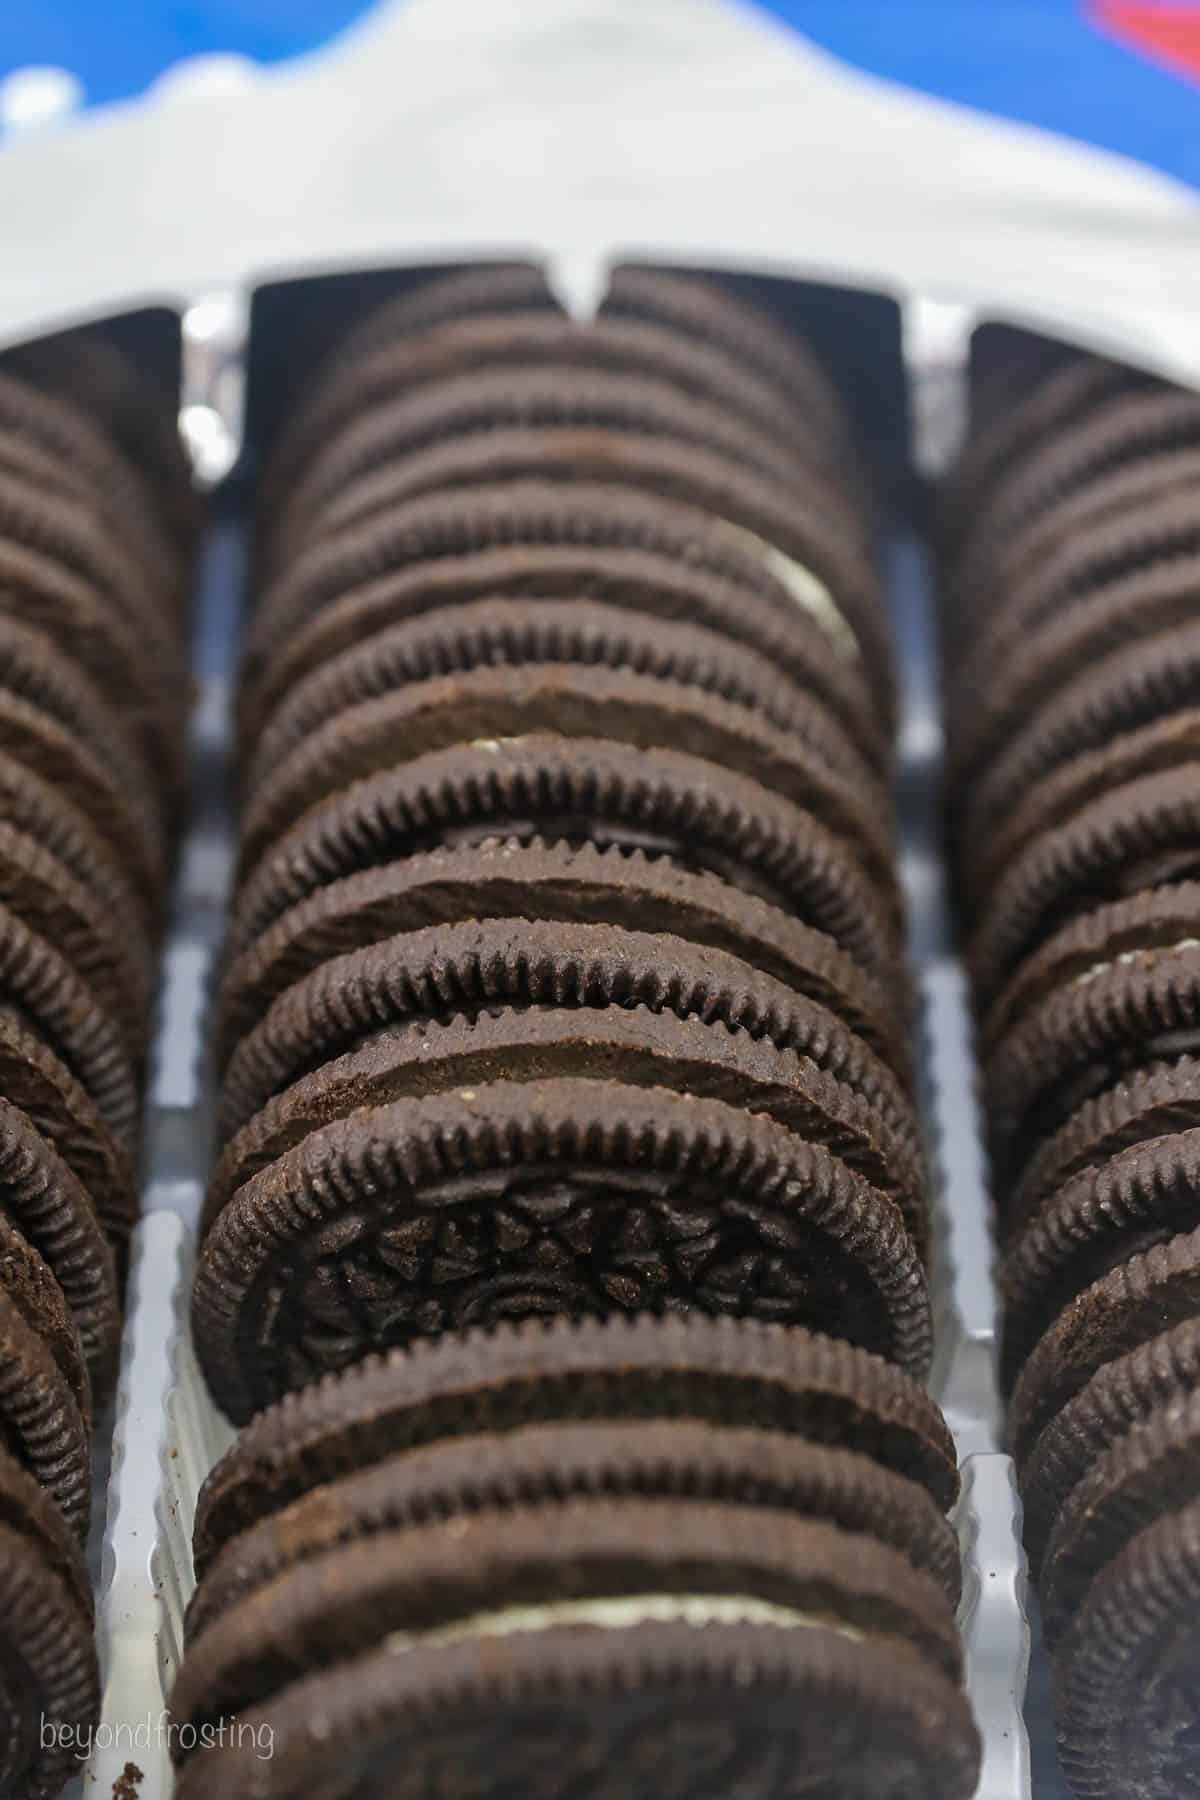 Close up of rows of Oreo cookies inside a sleeve.